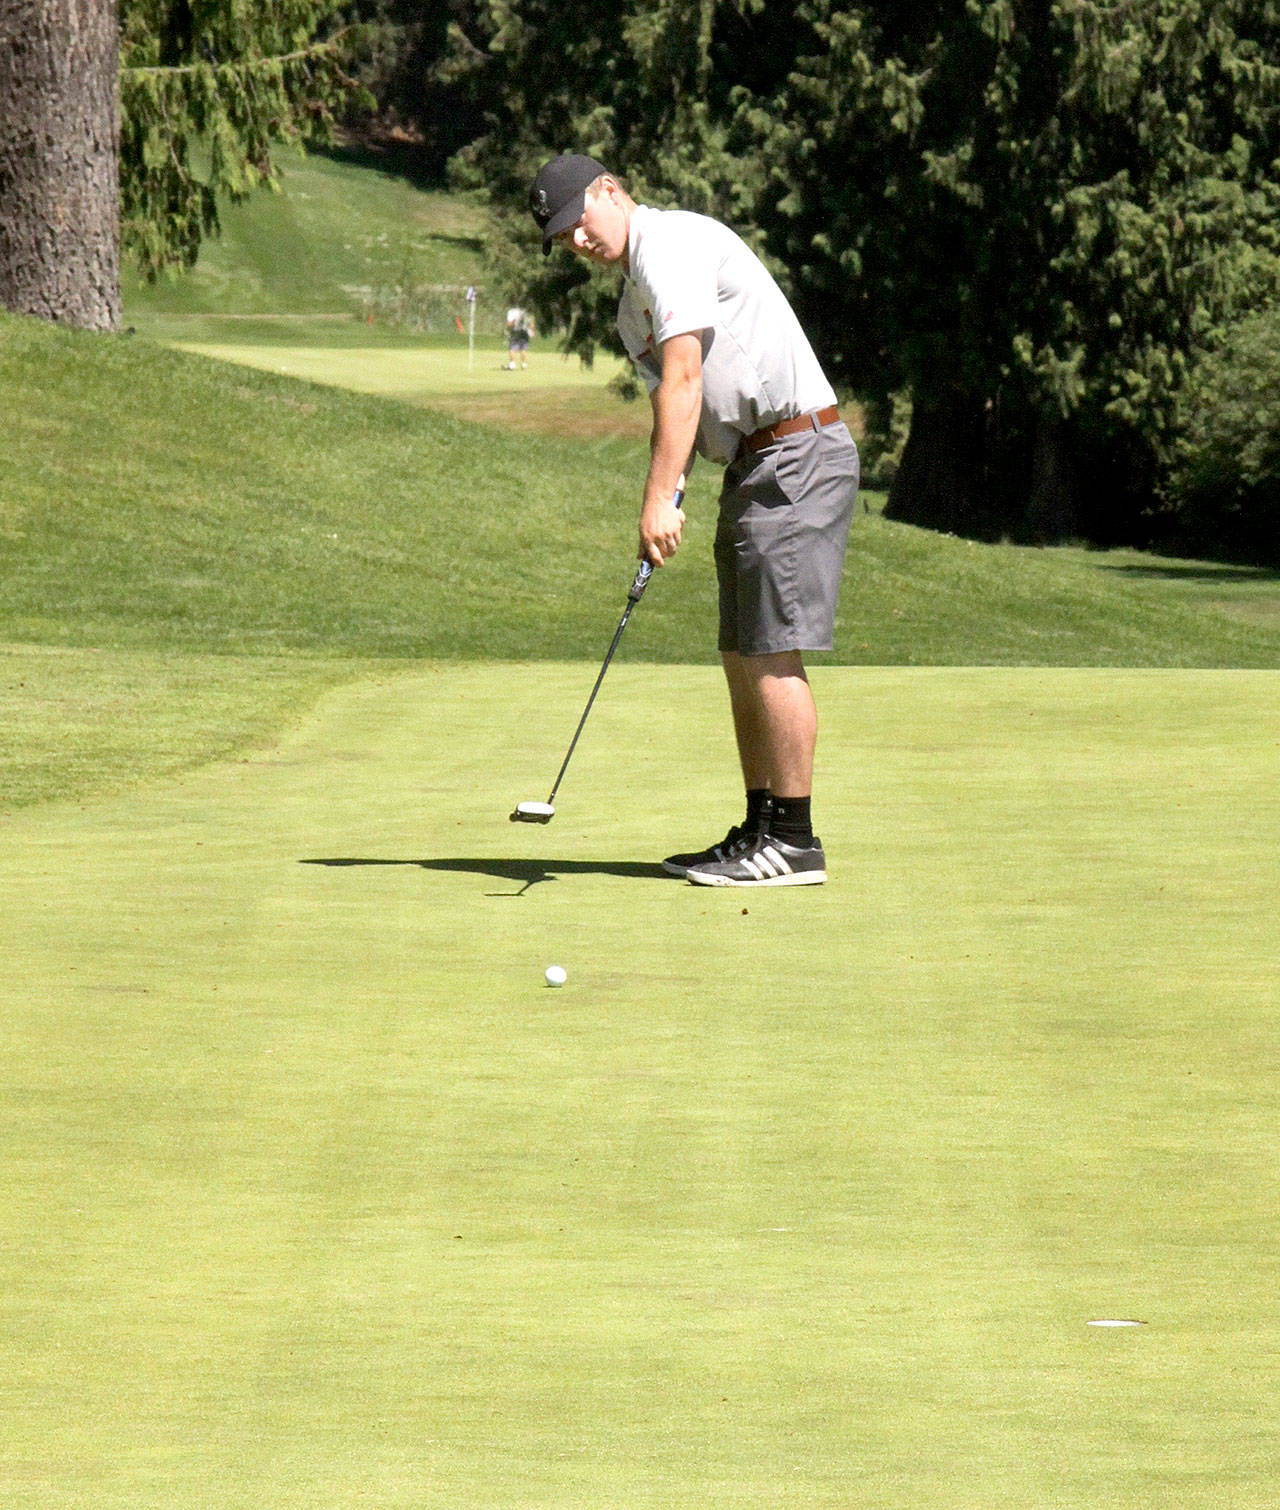 Dave Logan/for Peninsula Daily News                                Jack Shea, 19, putts on the 18th hole at Cedars at Dungeness Sunday to win the three-day Clallam County Amateur Golf Tournament with scores of 70-69-72 for a 211. Shea, a Sequim High School golfer who graduated in 2016, has won the event two years in a row.